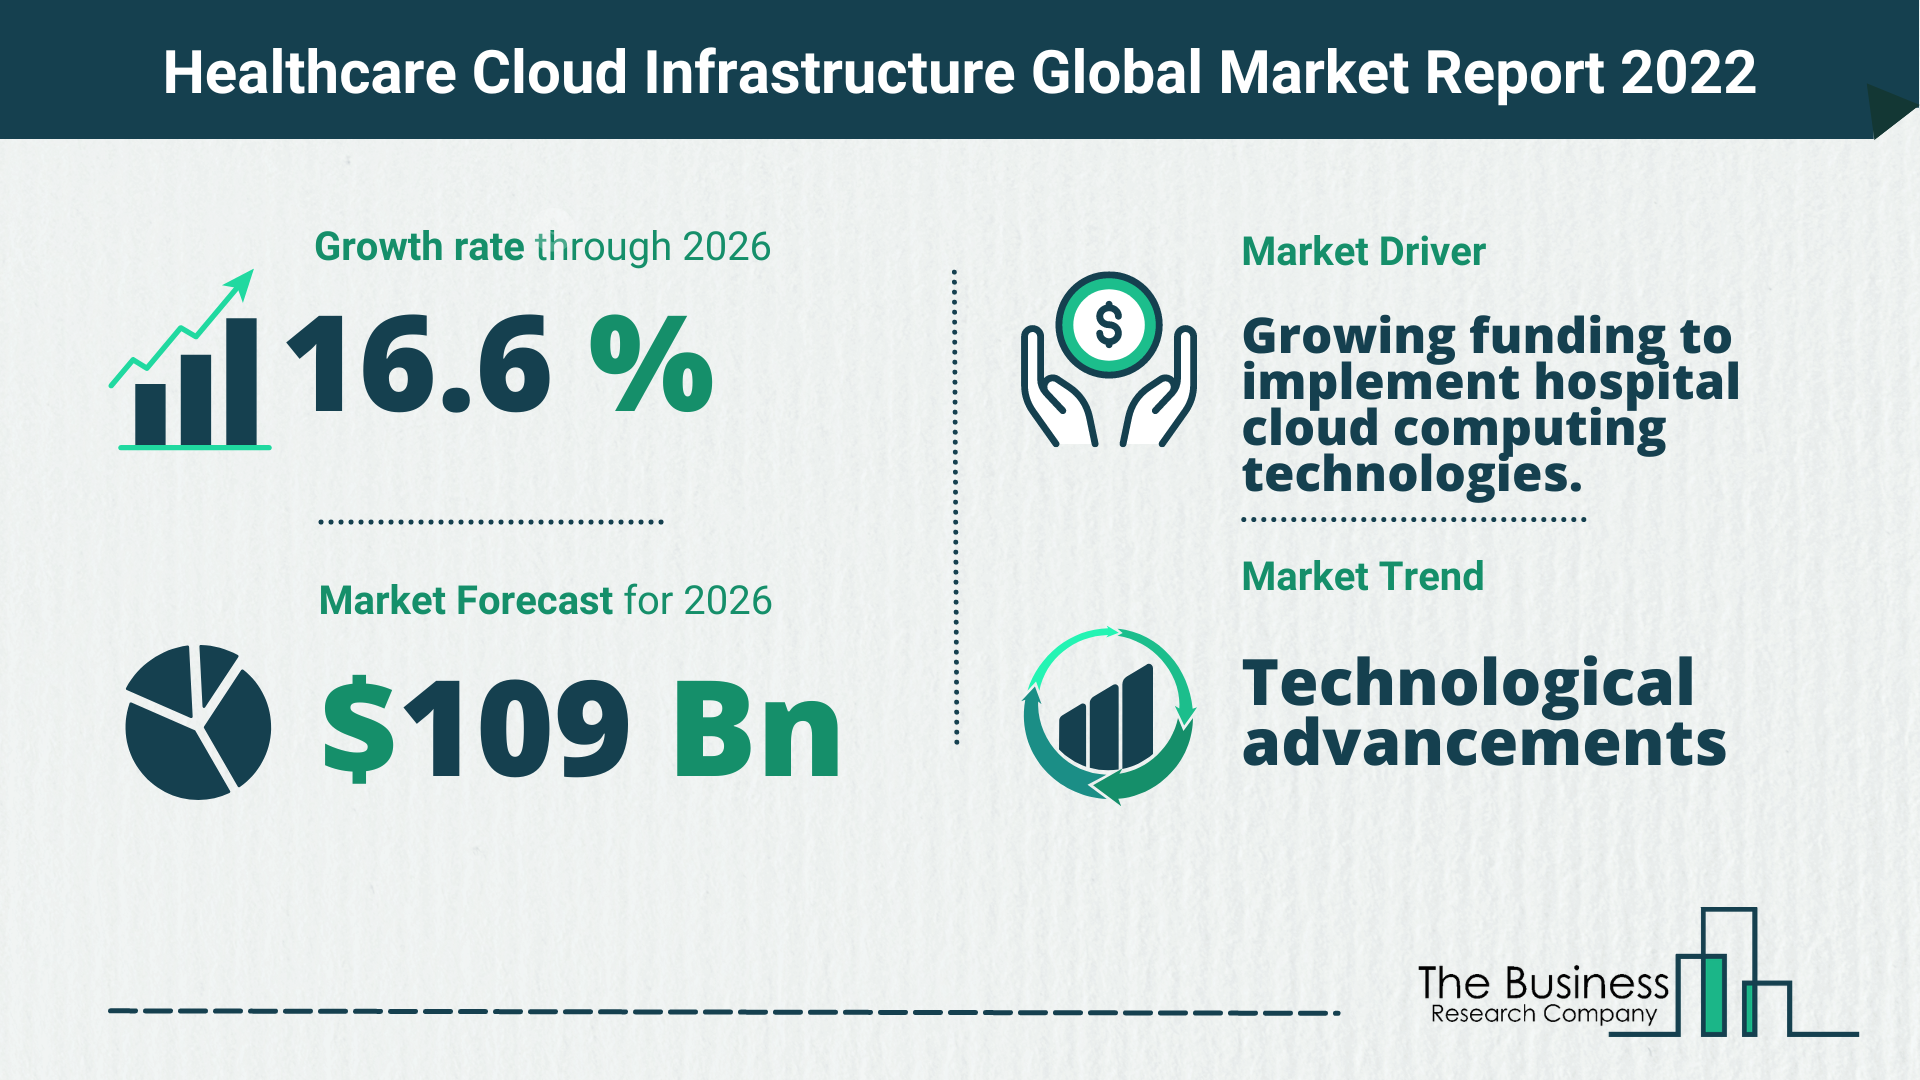 Latest Healthcare Cloud Infrastructure Market Growth Study 2022-2026 By The Business Research Company